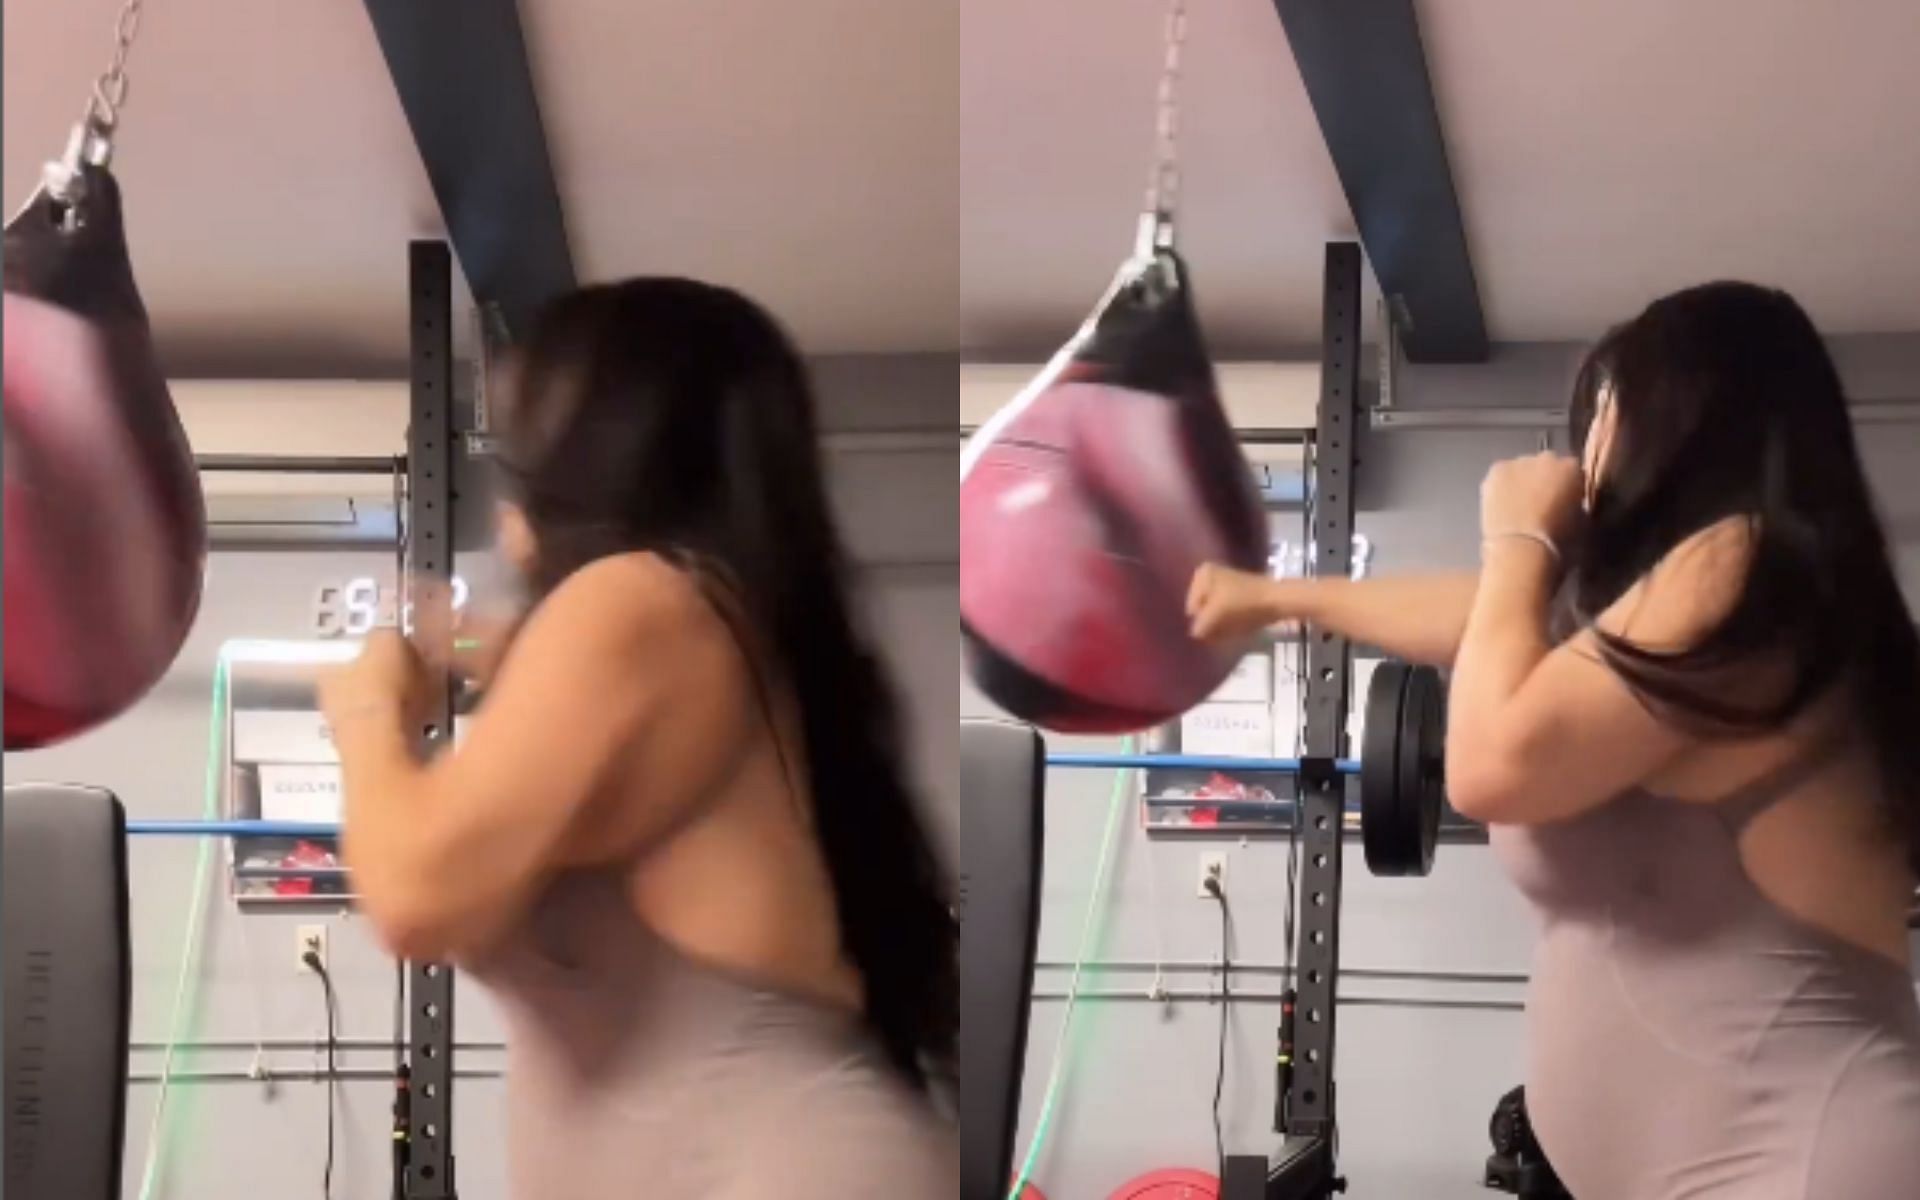 Ex-UFC star Rachael Ostovich tests her power on punching bag after announcing pregnancy with nude photoshoot in February [Image courtesy: @rachaelostovich - Instagram]